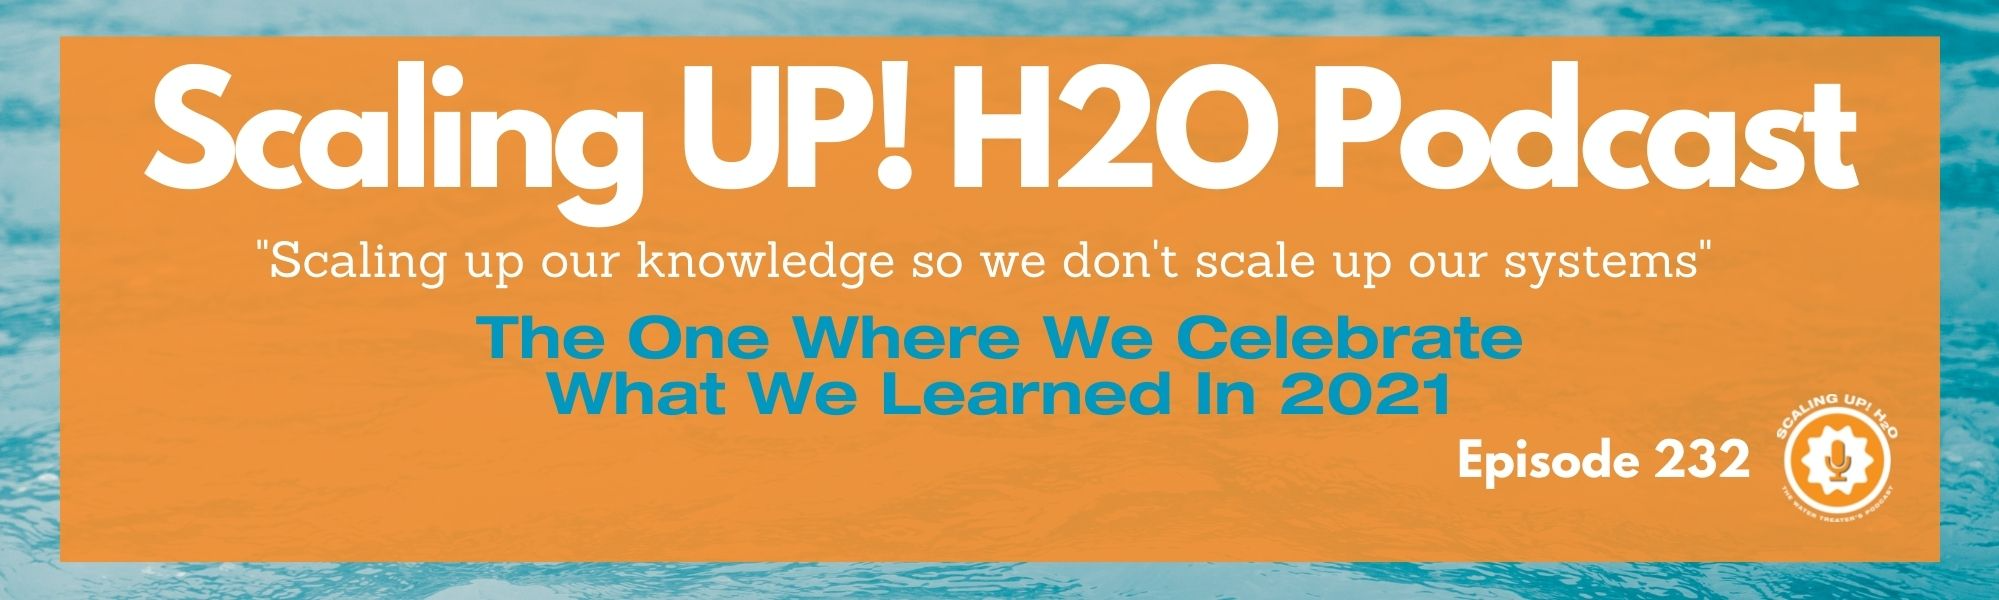 232 The One Where We Celebrate What We Learned In 2021 - Scaling UP! H2O